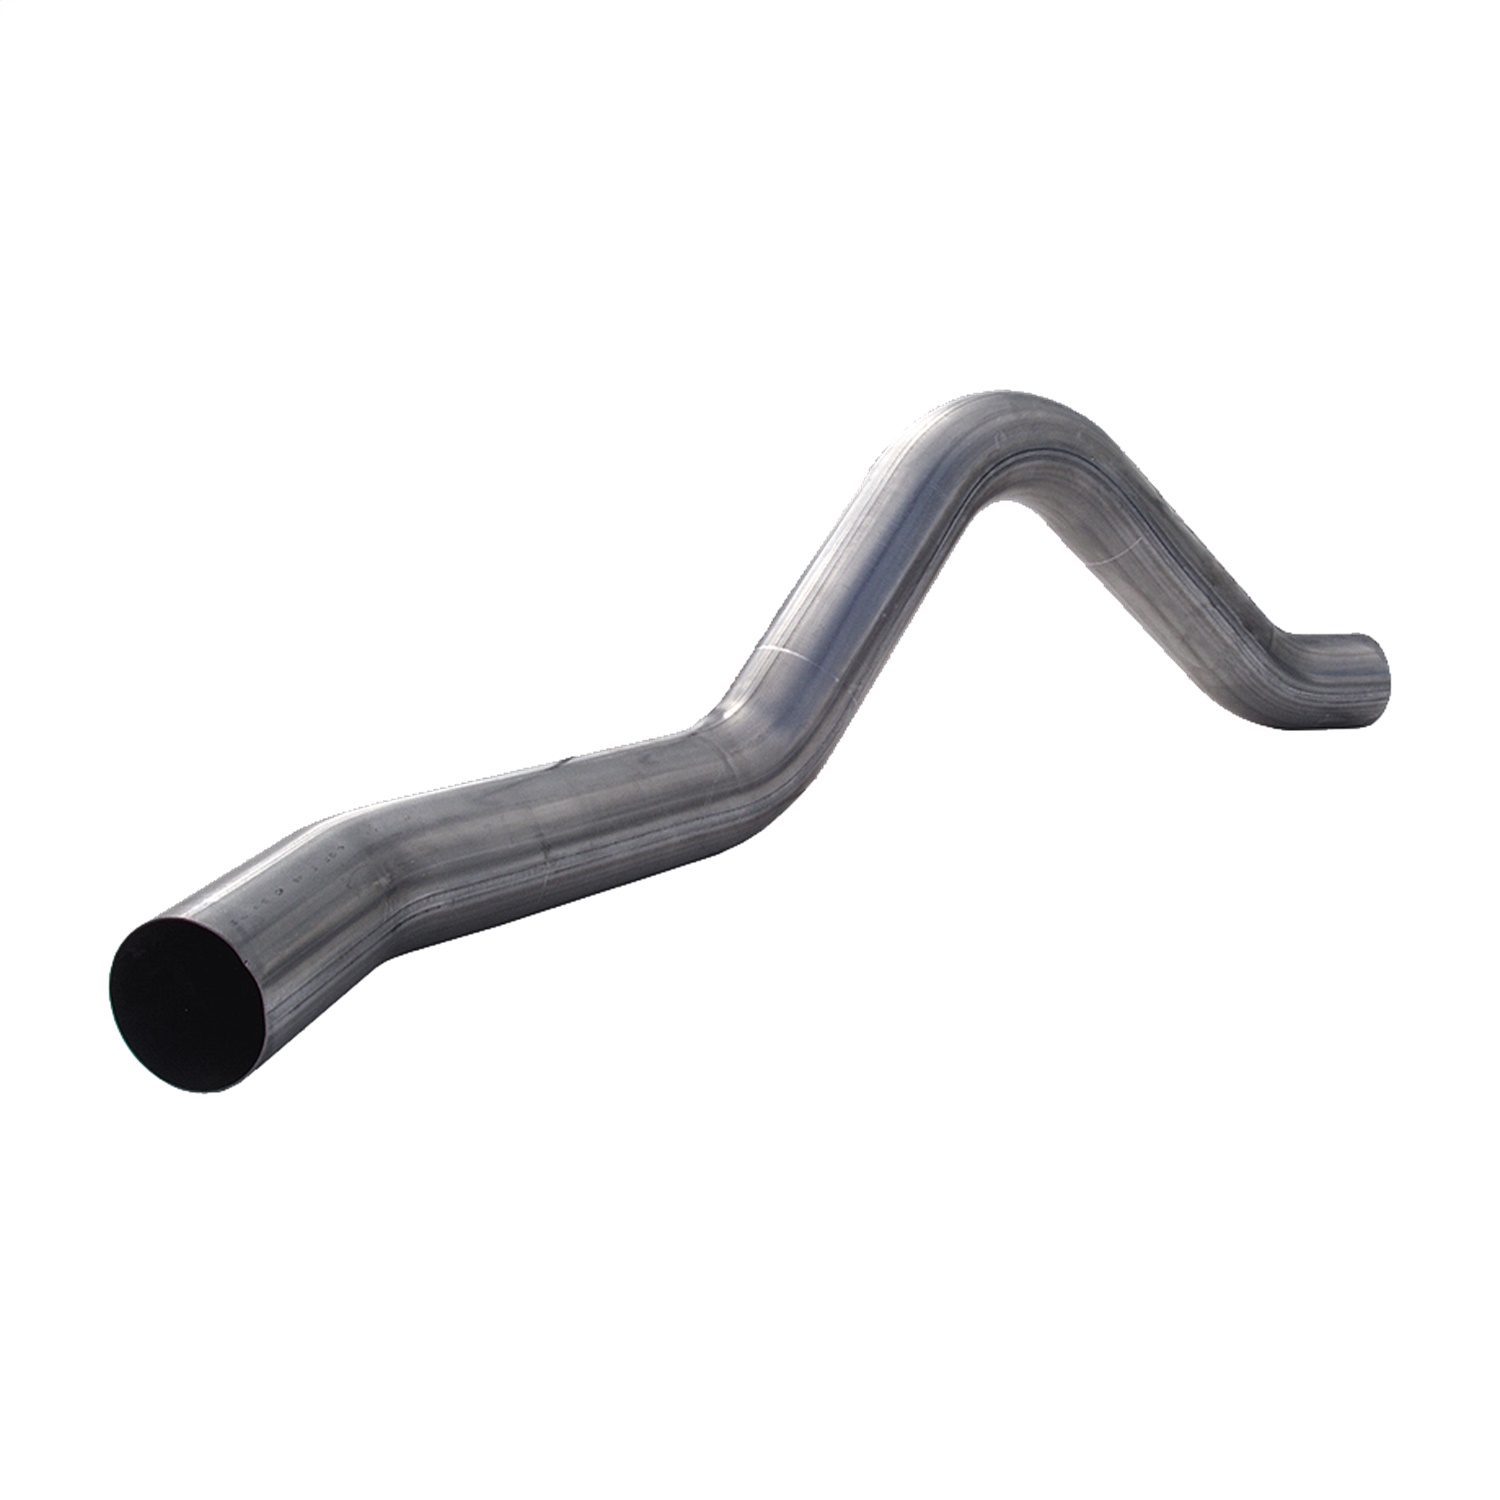 MBRP Exhaust GP006 Garage Parts Tail Pipe Fits 94-02 Ram 2500 Ram 3500